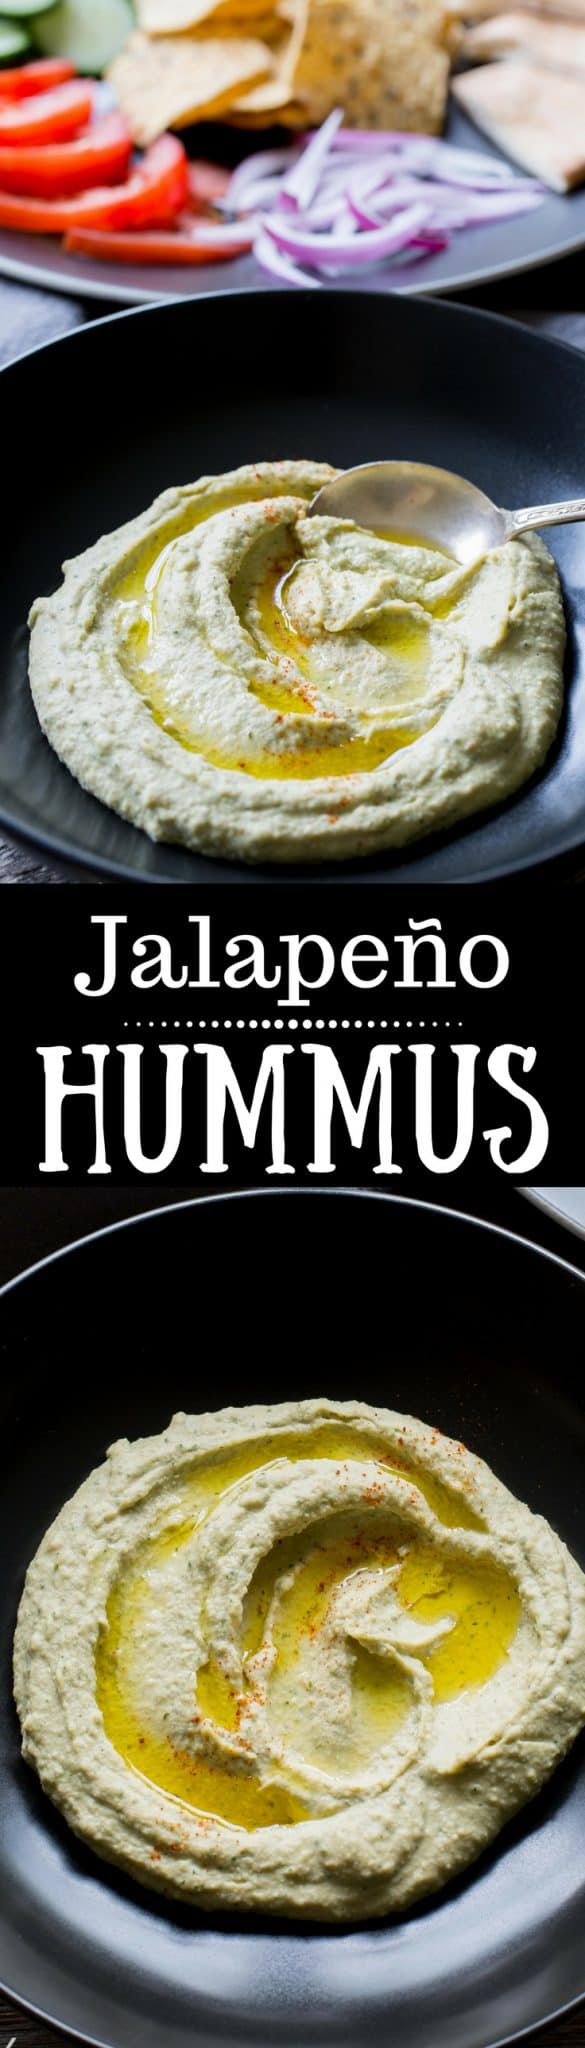 A creamy spicy hummus loaded with flavor from the jalapeño and cilantro. Serve with pita wedges, sliced tomatoes, cucumbers, onions and/or chips |  www.savingdessert.com